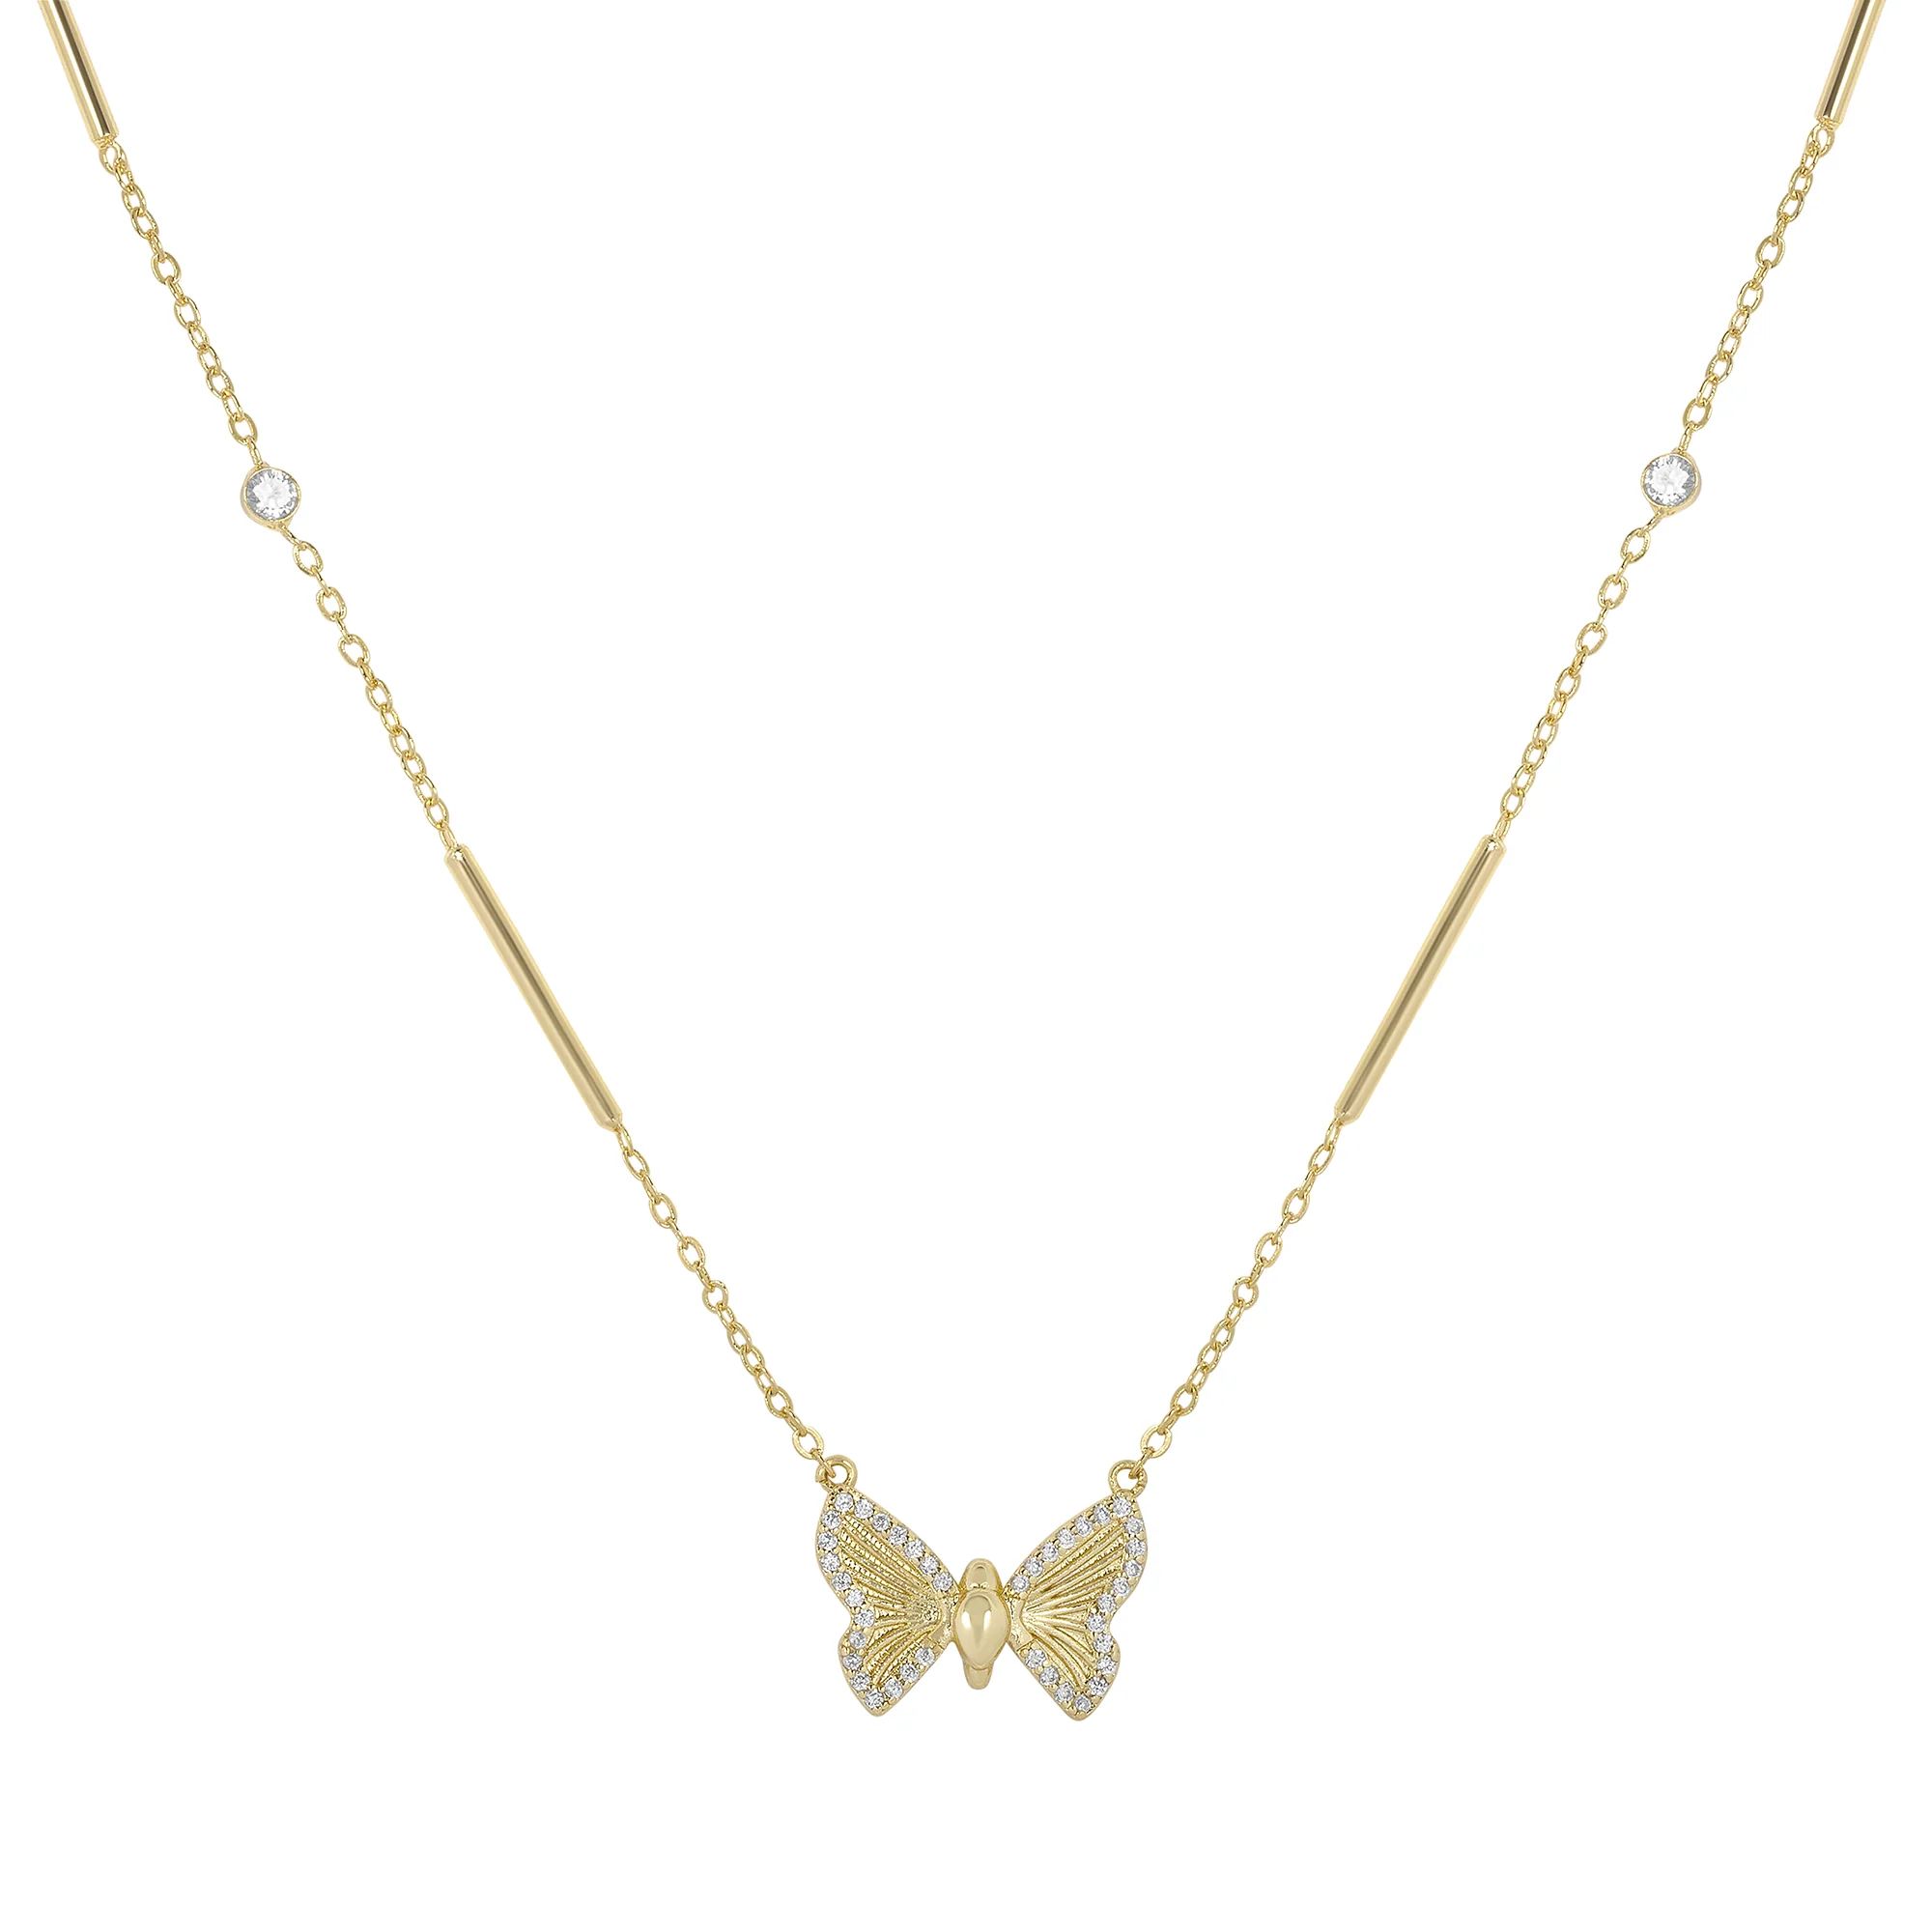 Fly Away Necklace | Electric Picks Jewelry